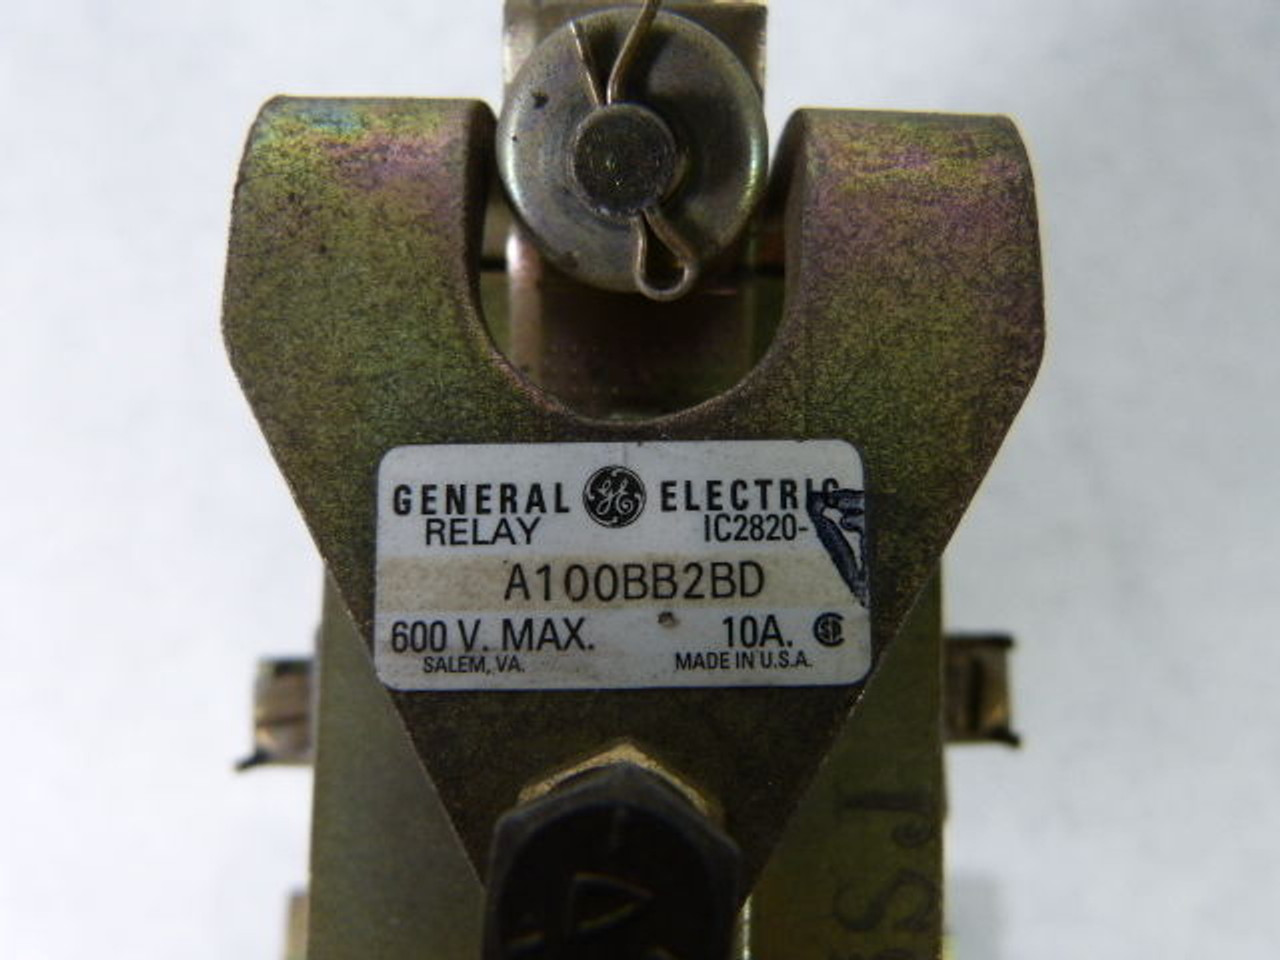 General Electric IC2820-A100BB2BD Relay Current Sensitive 600V 10A Coil USED